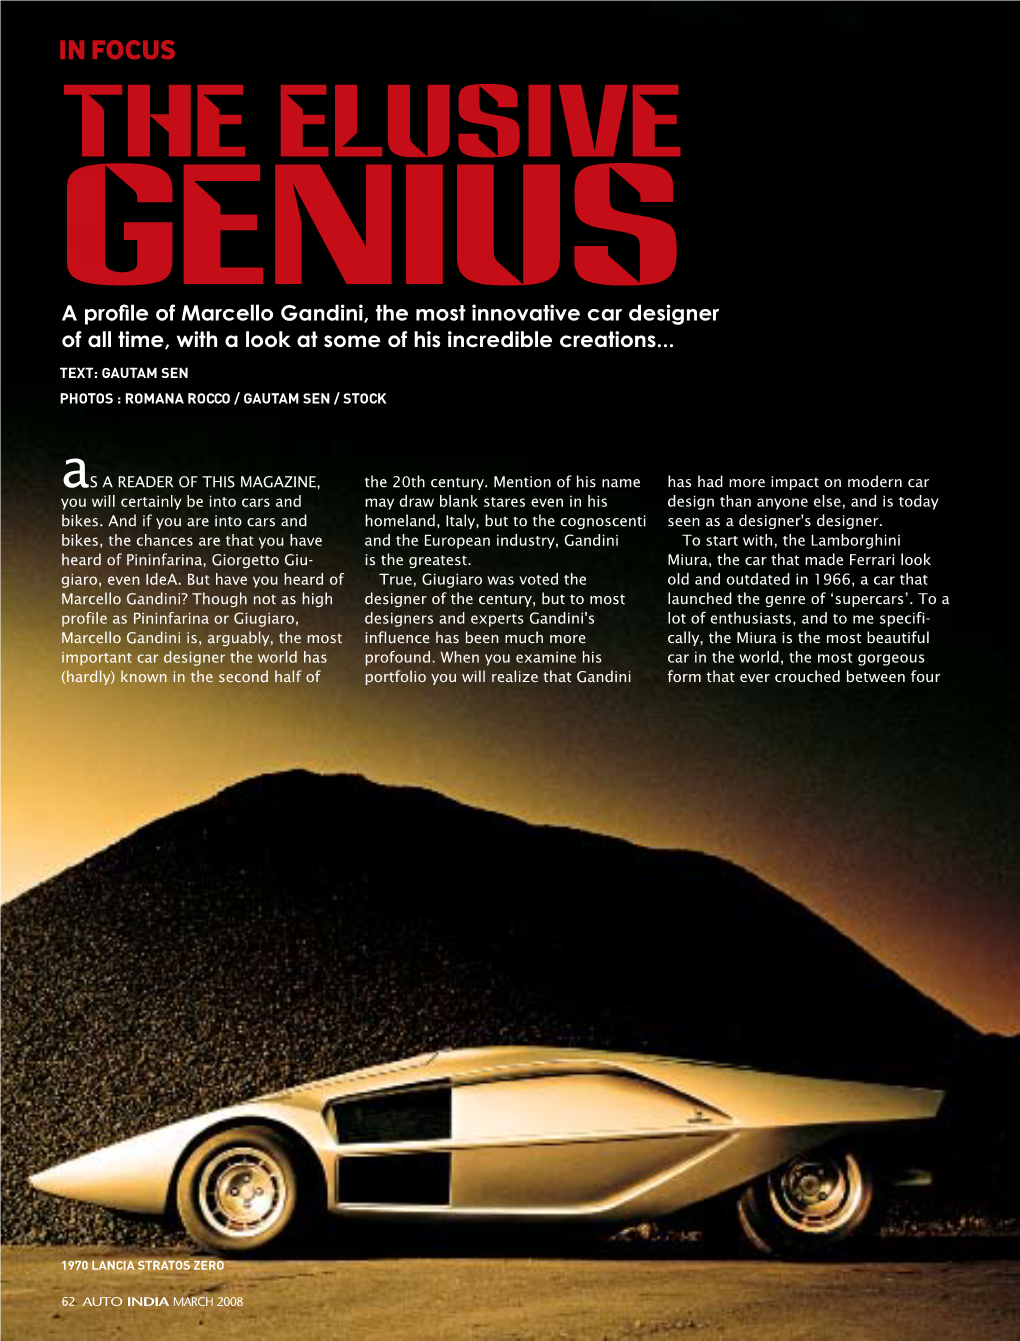 The Elusive Genius a Profile of Marcello Gandini, the Most Innovative Car Designer of All Time, with a Look at Some of His Incredible Creations